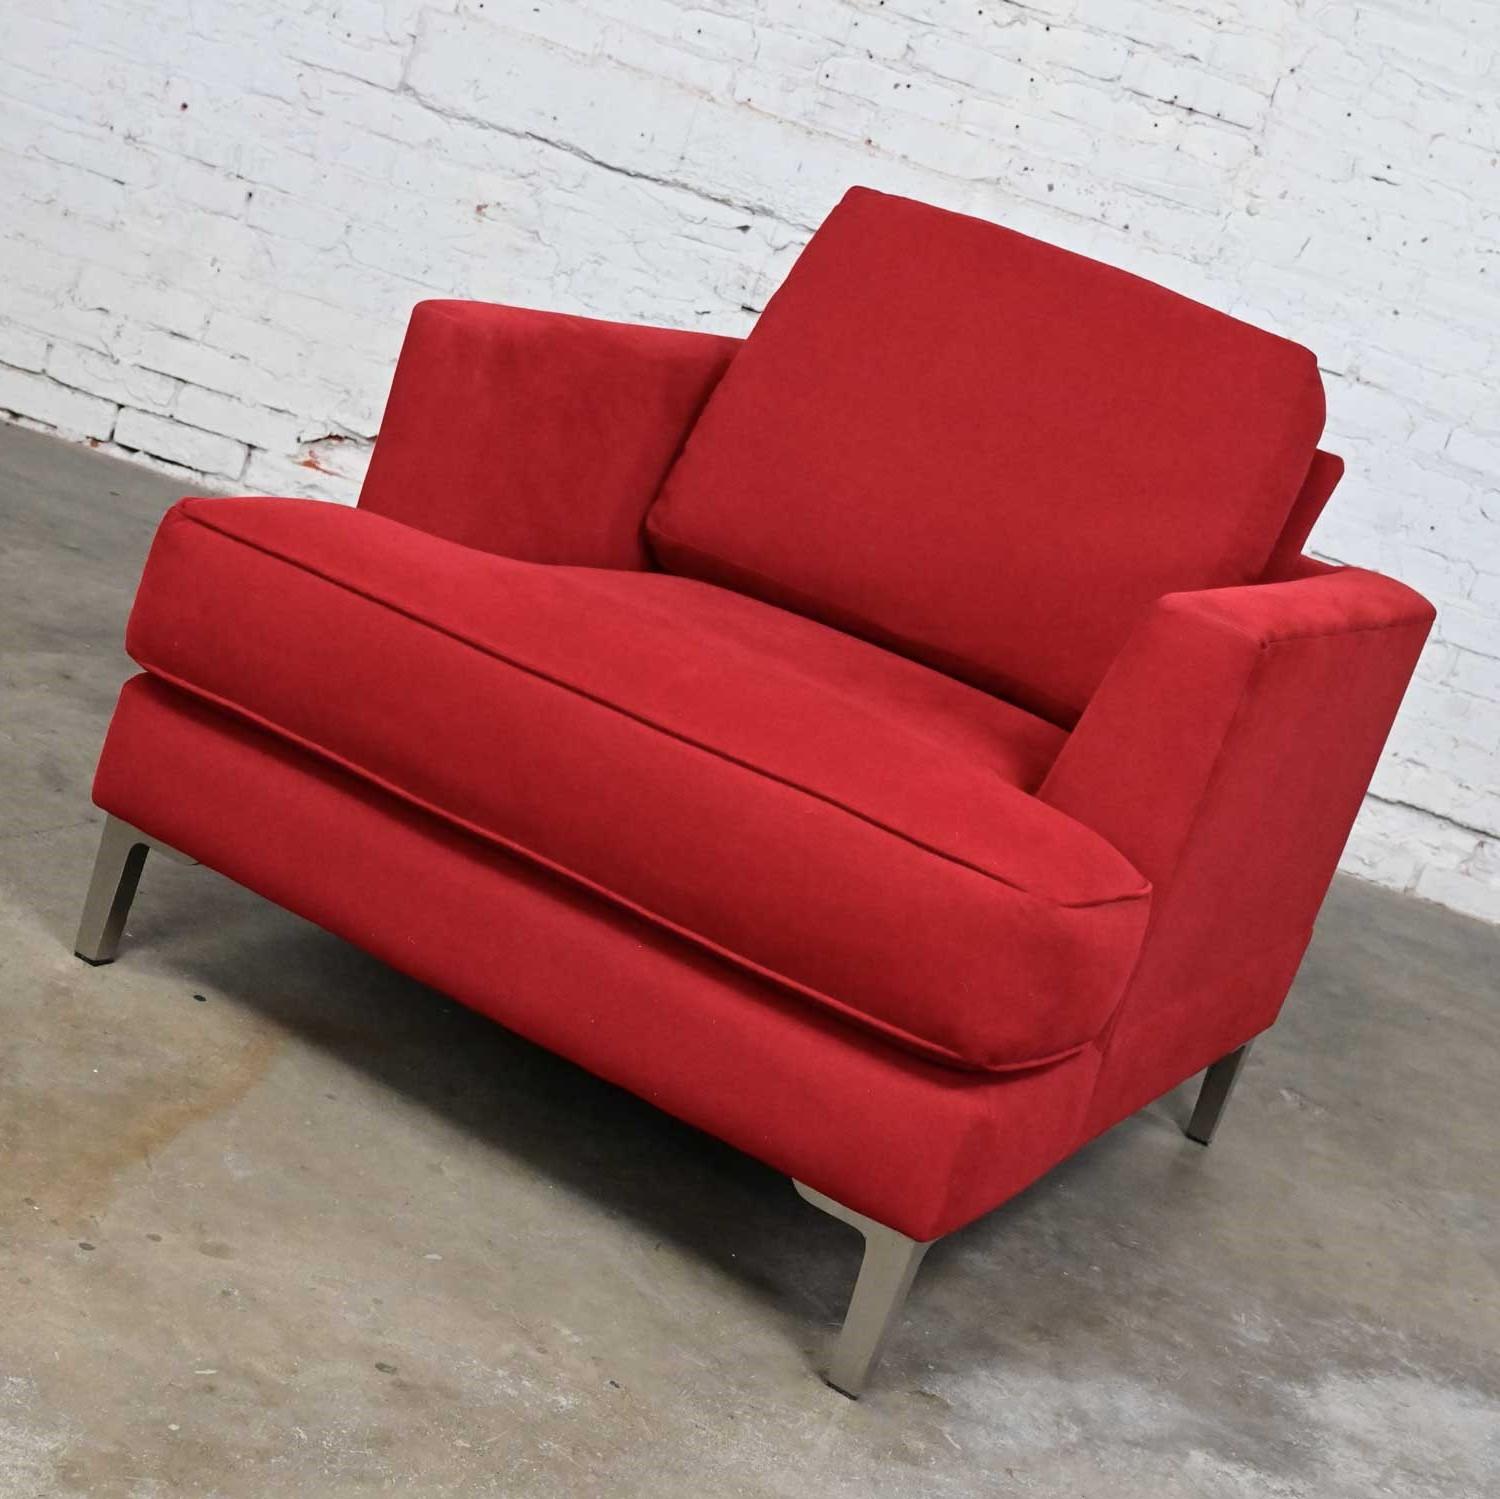 Contemporary Modern Carter Club Chair Attr Zen Collection Bright Red with Polished Steel Legs For Sale